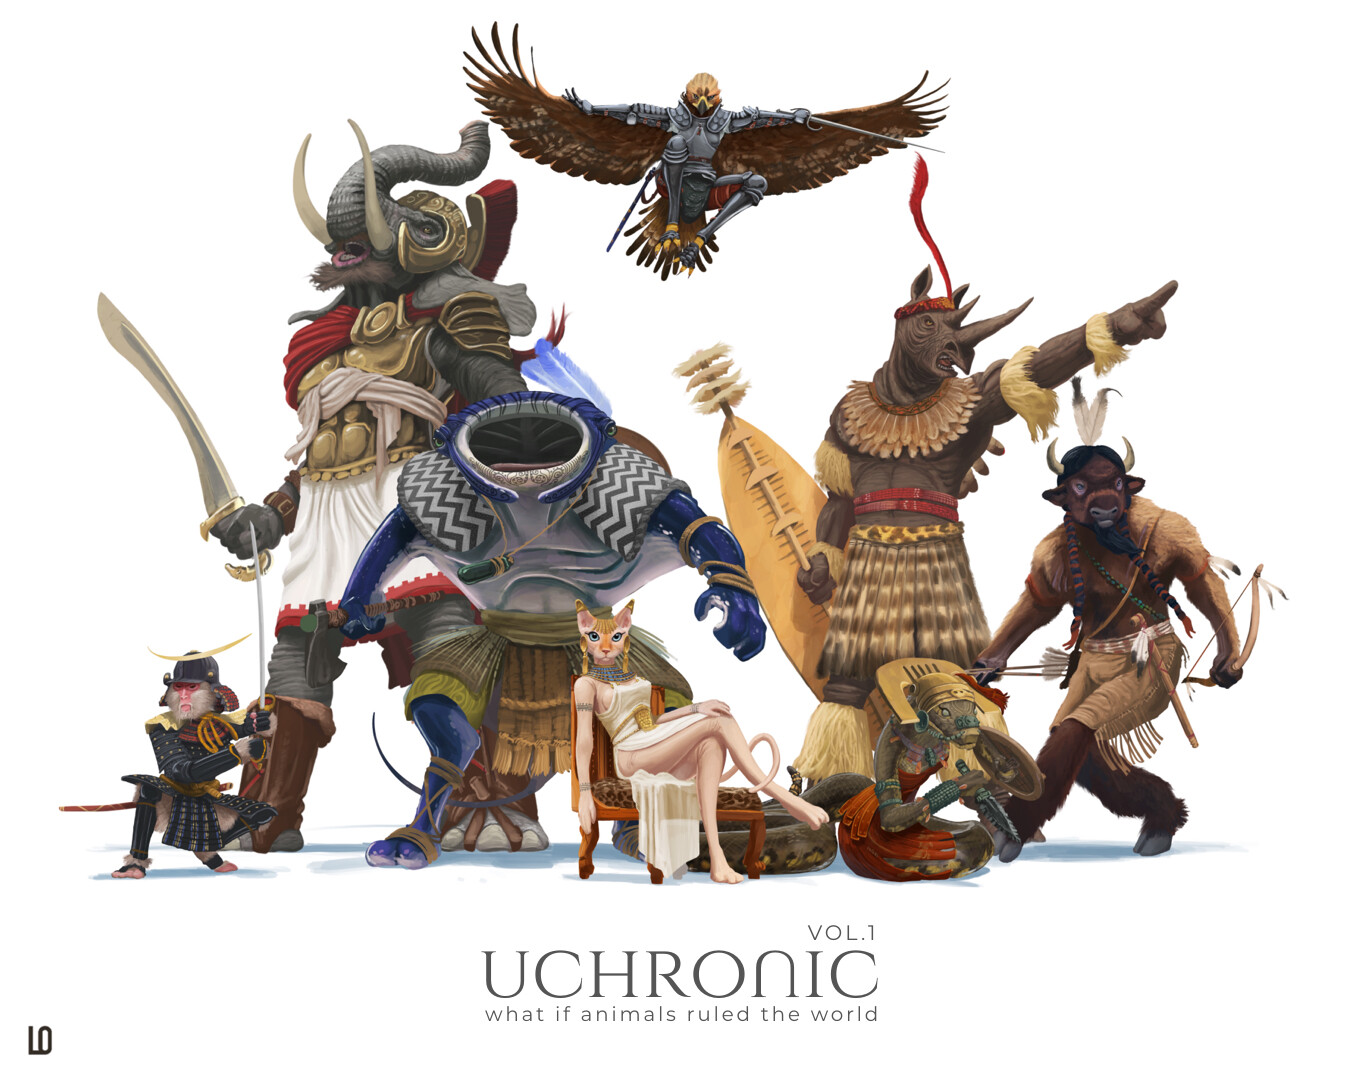 The first eight characters from Uchronic, Vol.1 team!